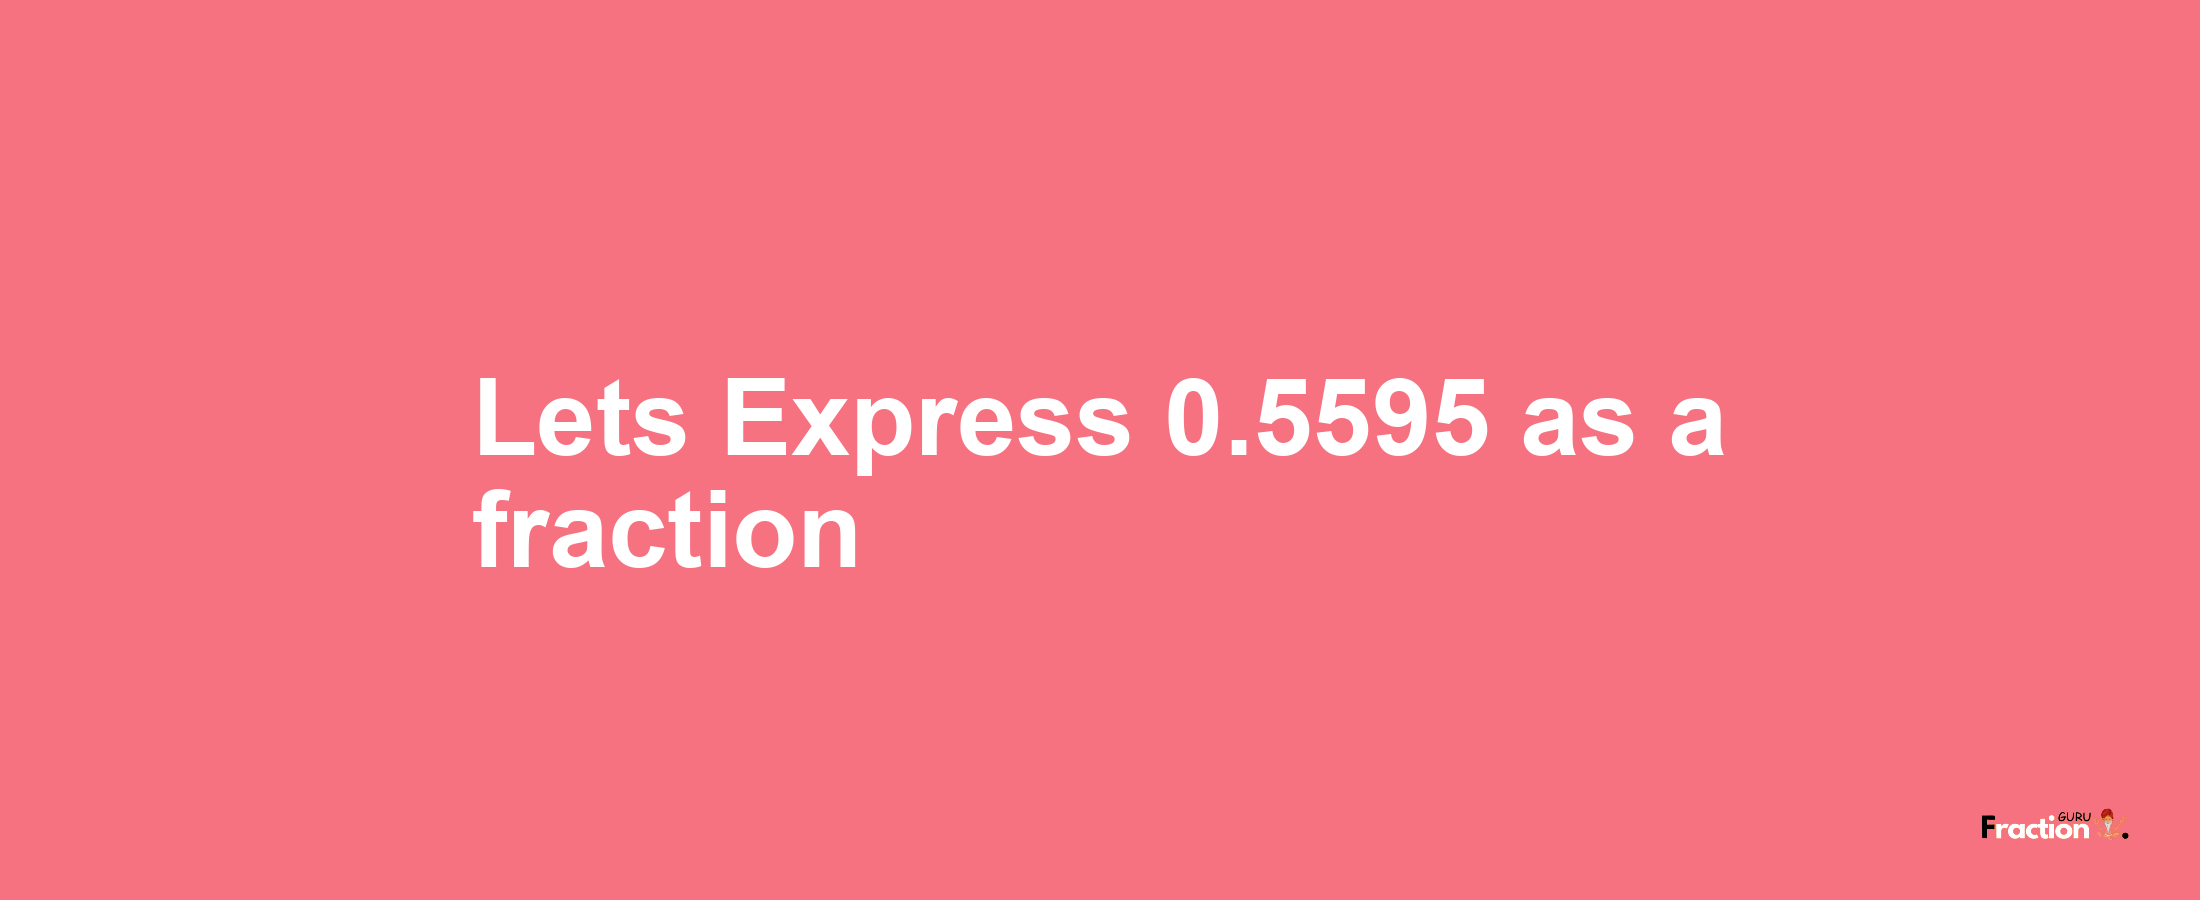 Lets Express 0.5595 as afraction